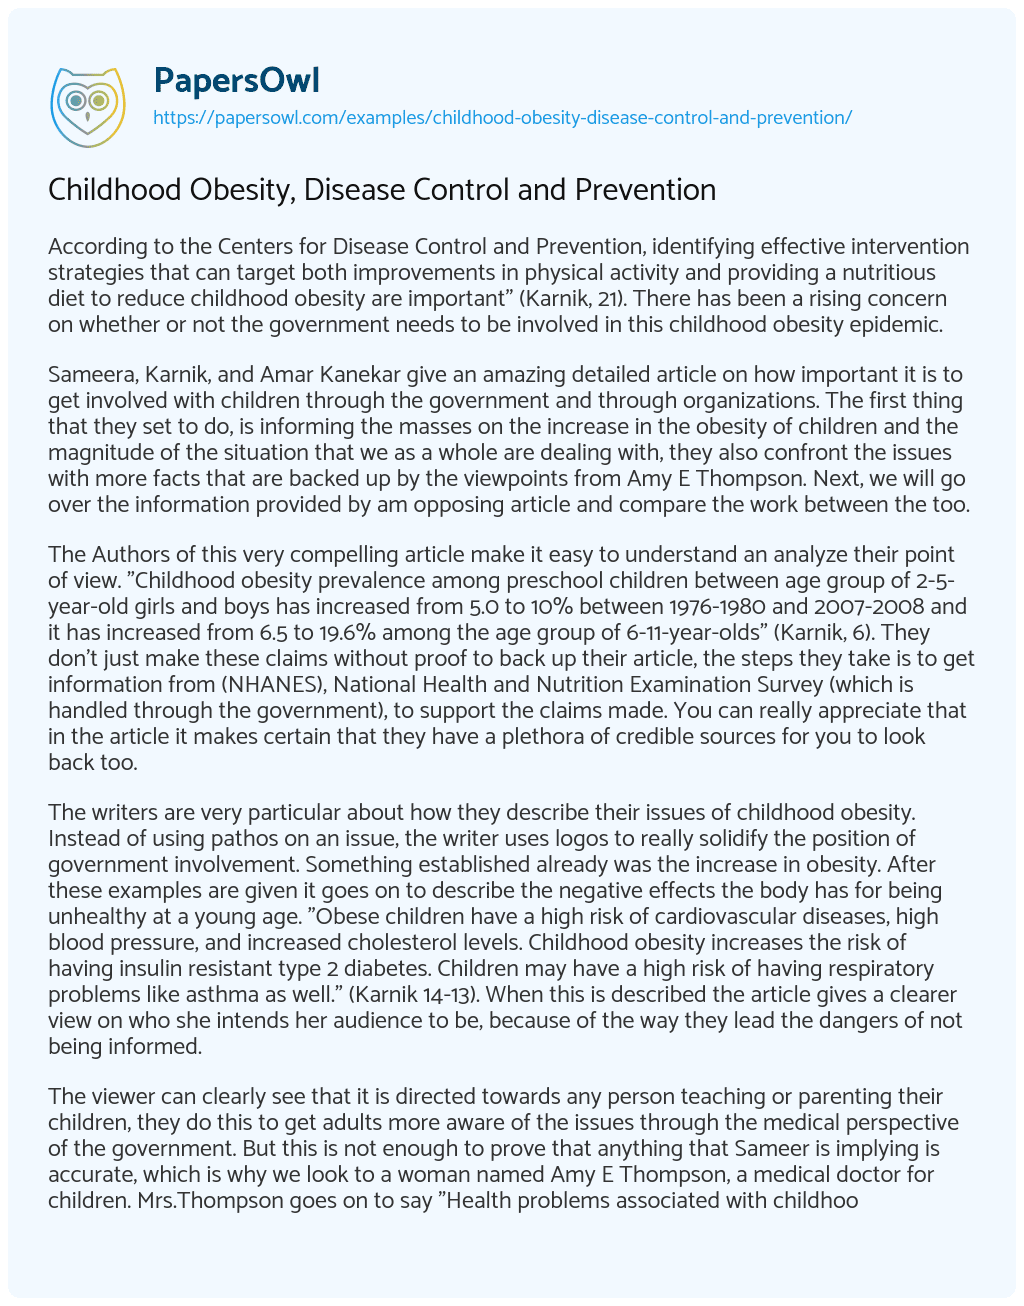 Essay on Childhood Obesity, Disease Control and Prevention